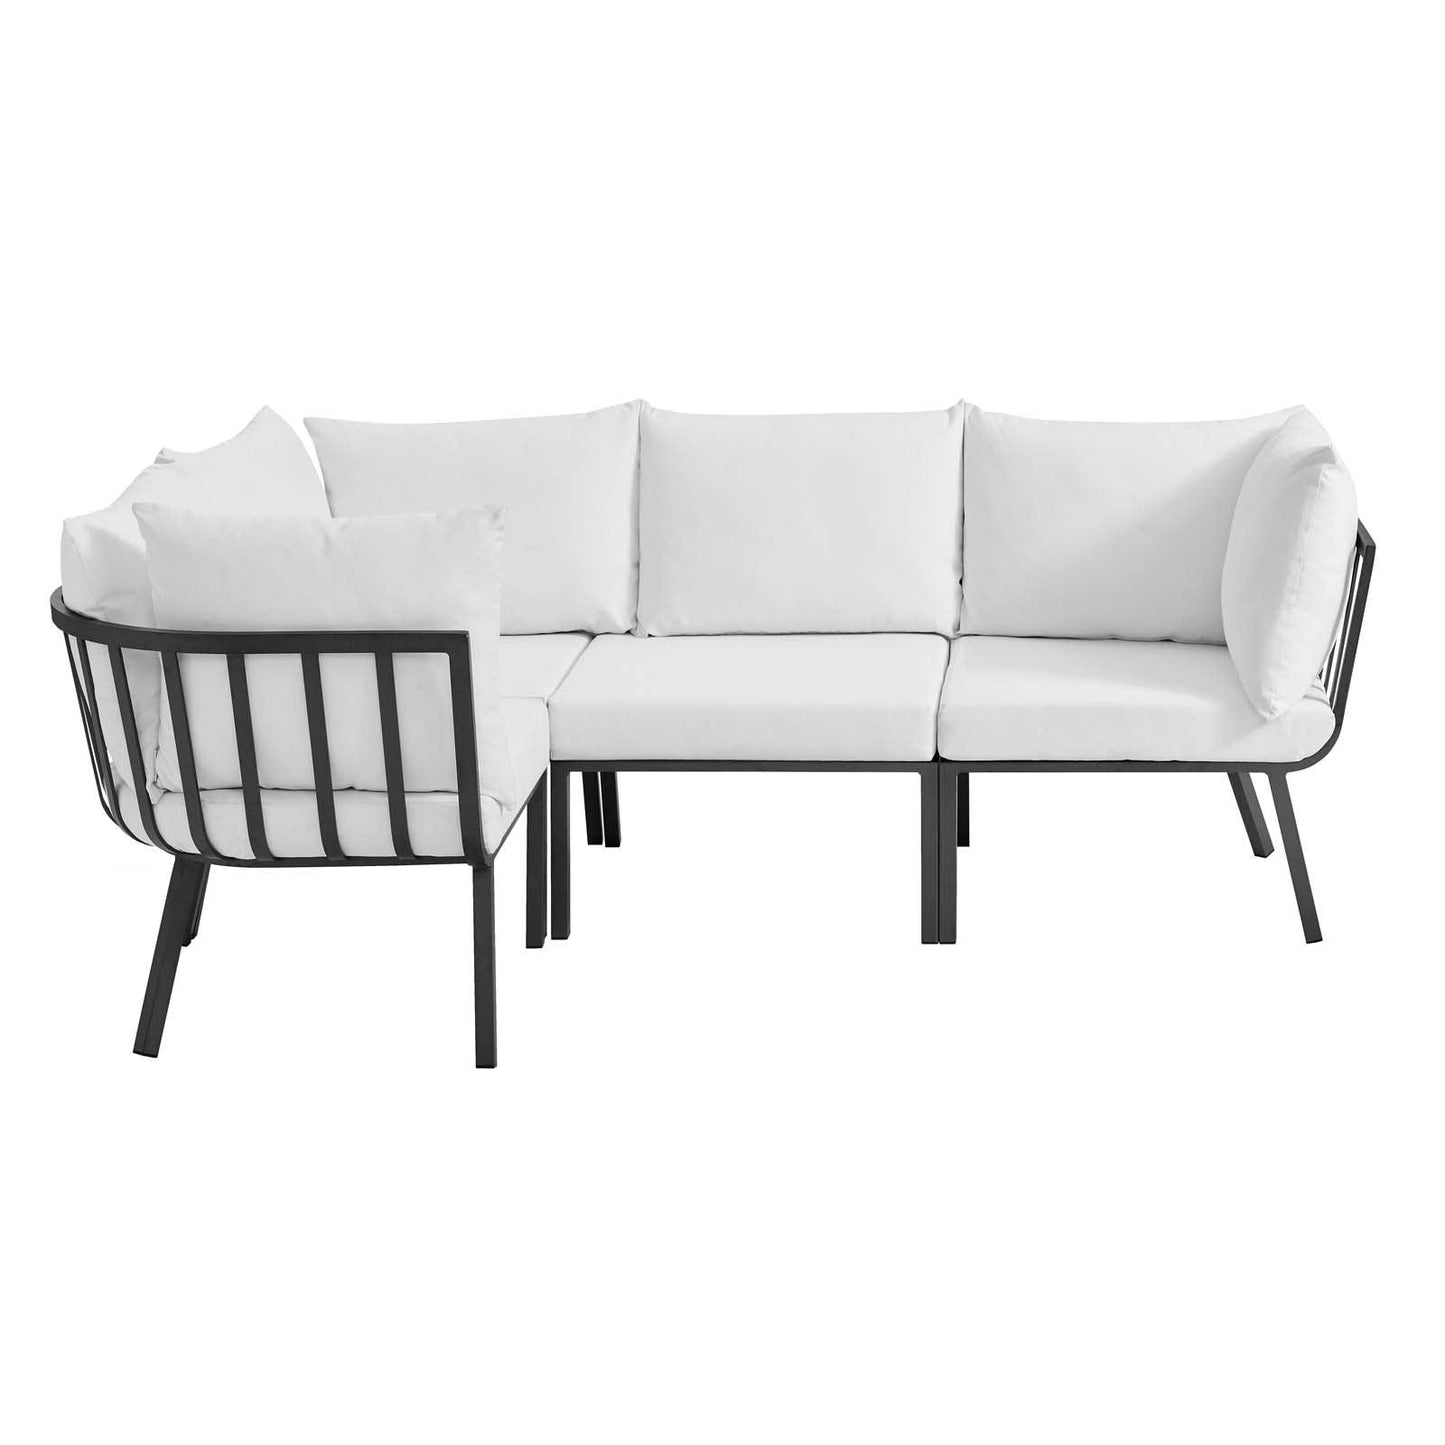 Modway Riverside 4 Piece Outdoor Patio Aluminum Sectional FredCo